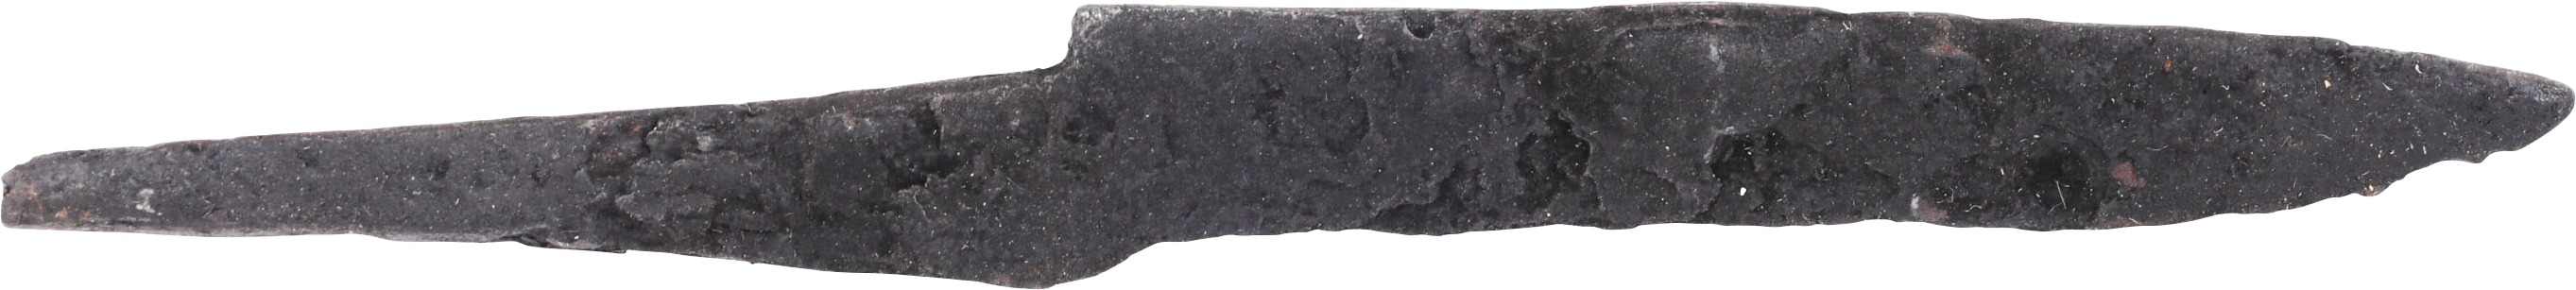 VIKING POUCH KNIFE, 9TH-11TH CENTURY